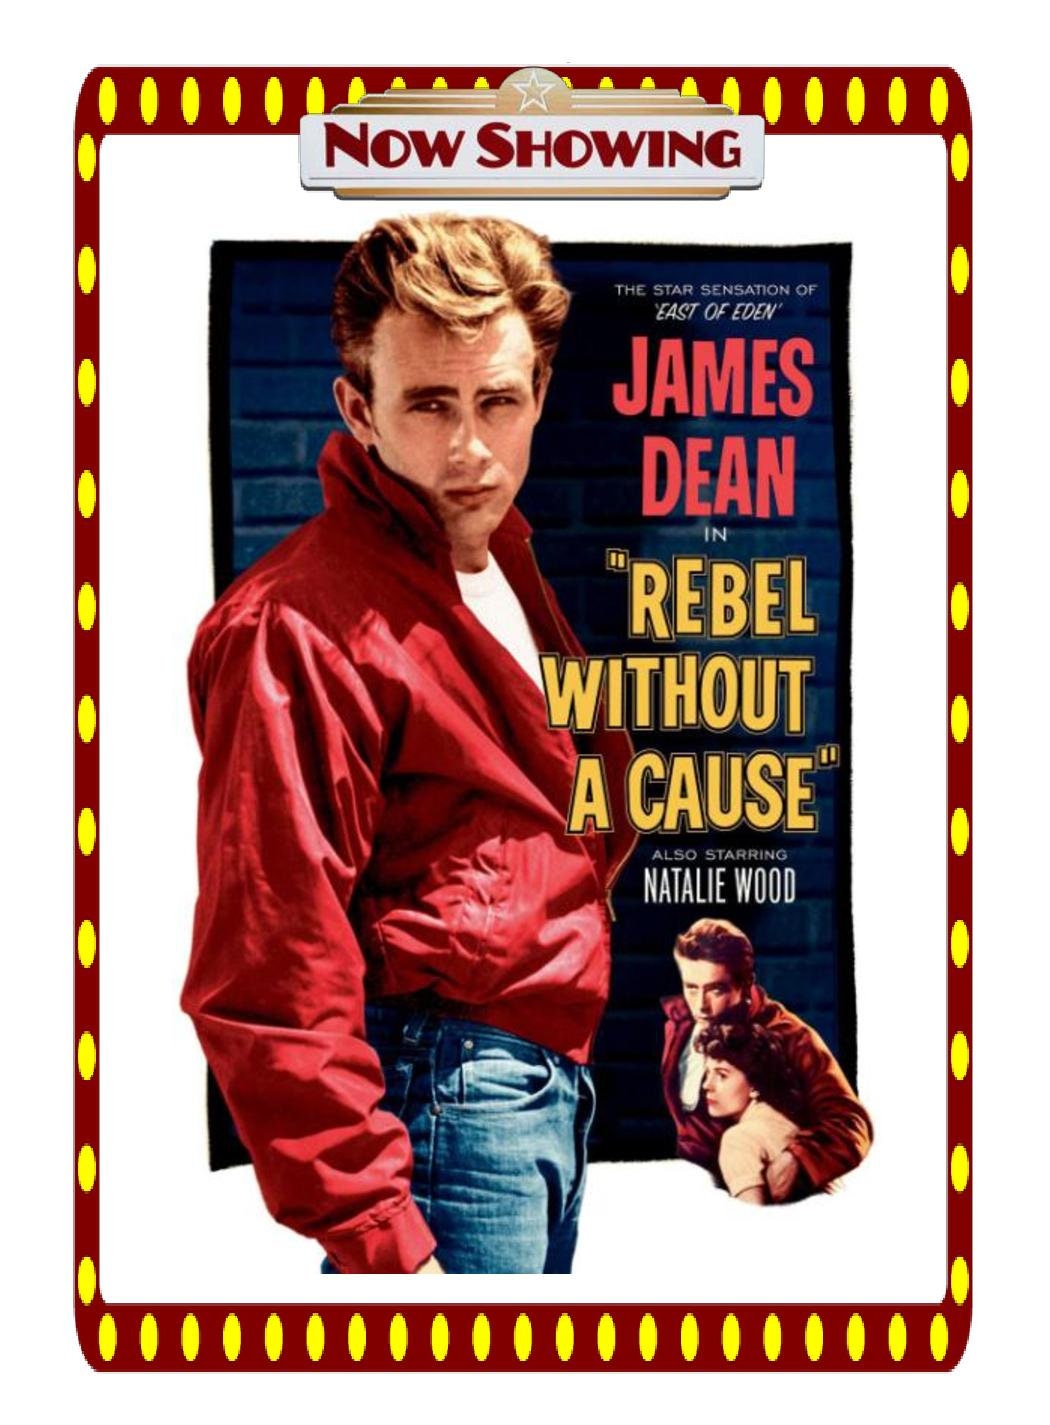 Rebel Without A Cause 1955 Movie Poster 3X4 High | Etsy